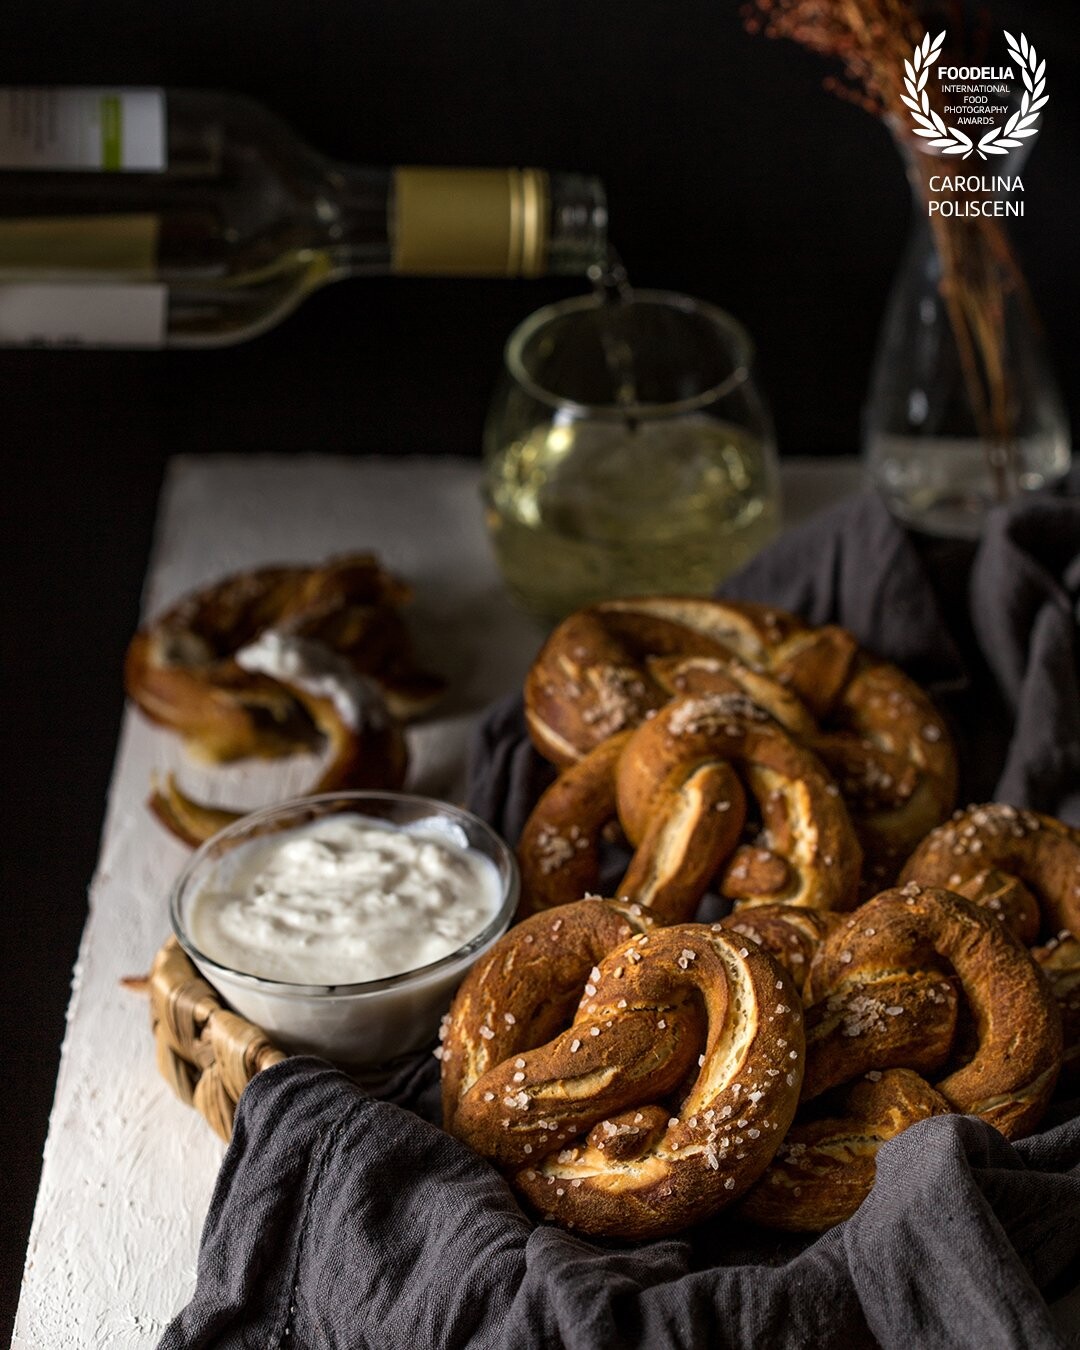 This photo was inspired by memories of a trip to Berlin in 2018. The Bretzels were amazing there and when I returned to my country I missed them so much, so I decided to give my recipe a try. Not the same but good enough